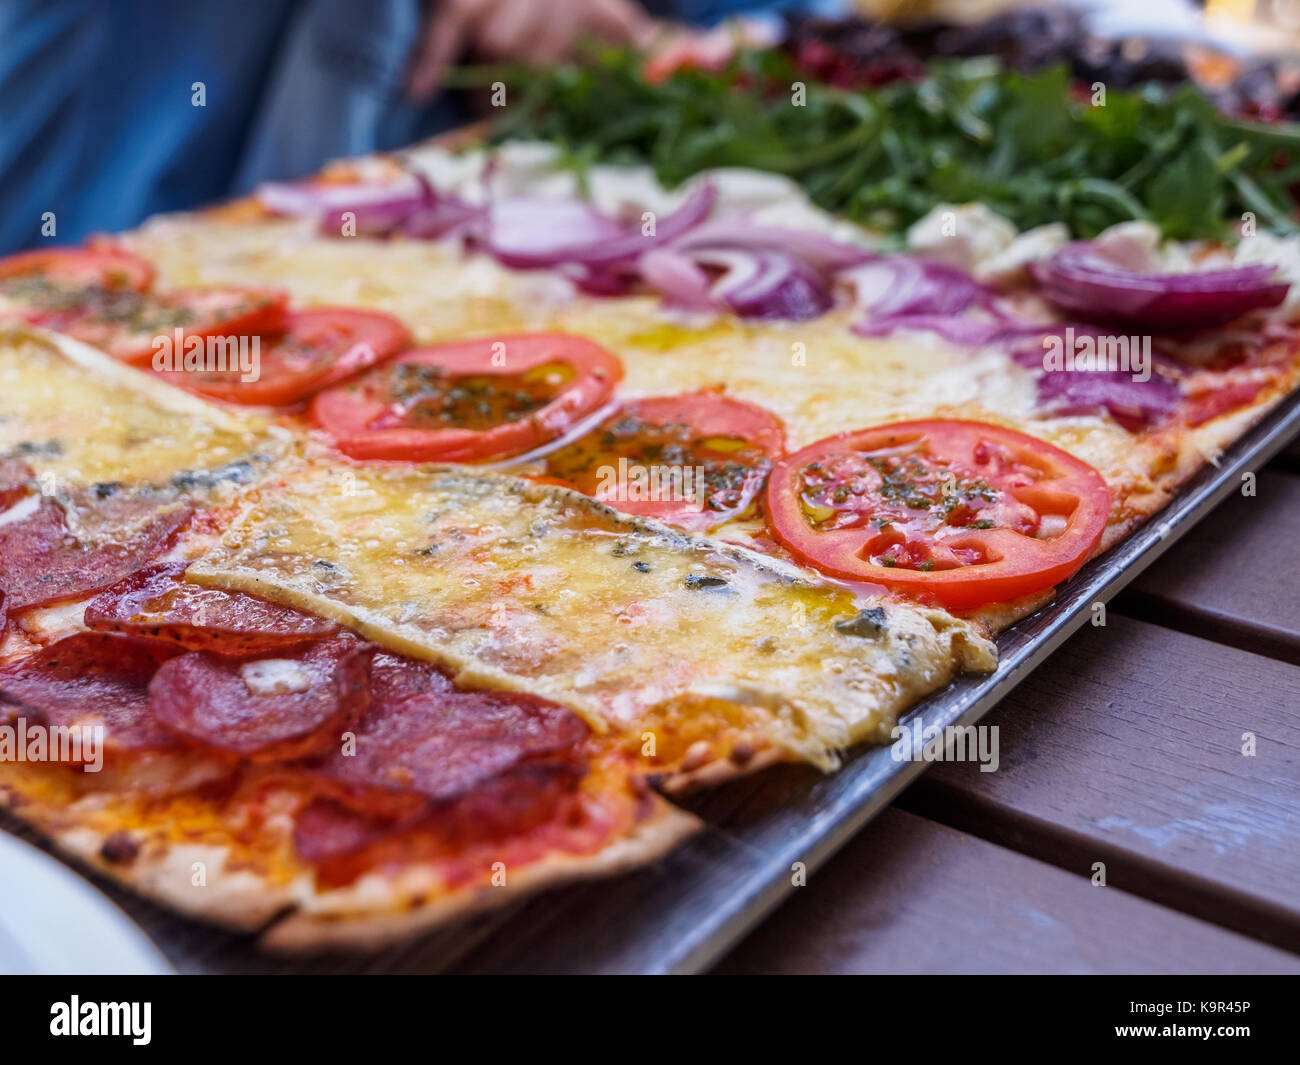 Thin crust pizza with multiple toppings (Pepperoni, Cheese, Tomato, Onion, Arugula) presented in a unique way Stock Photo